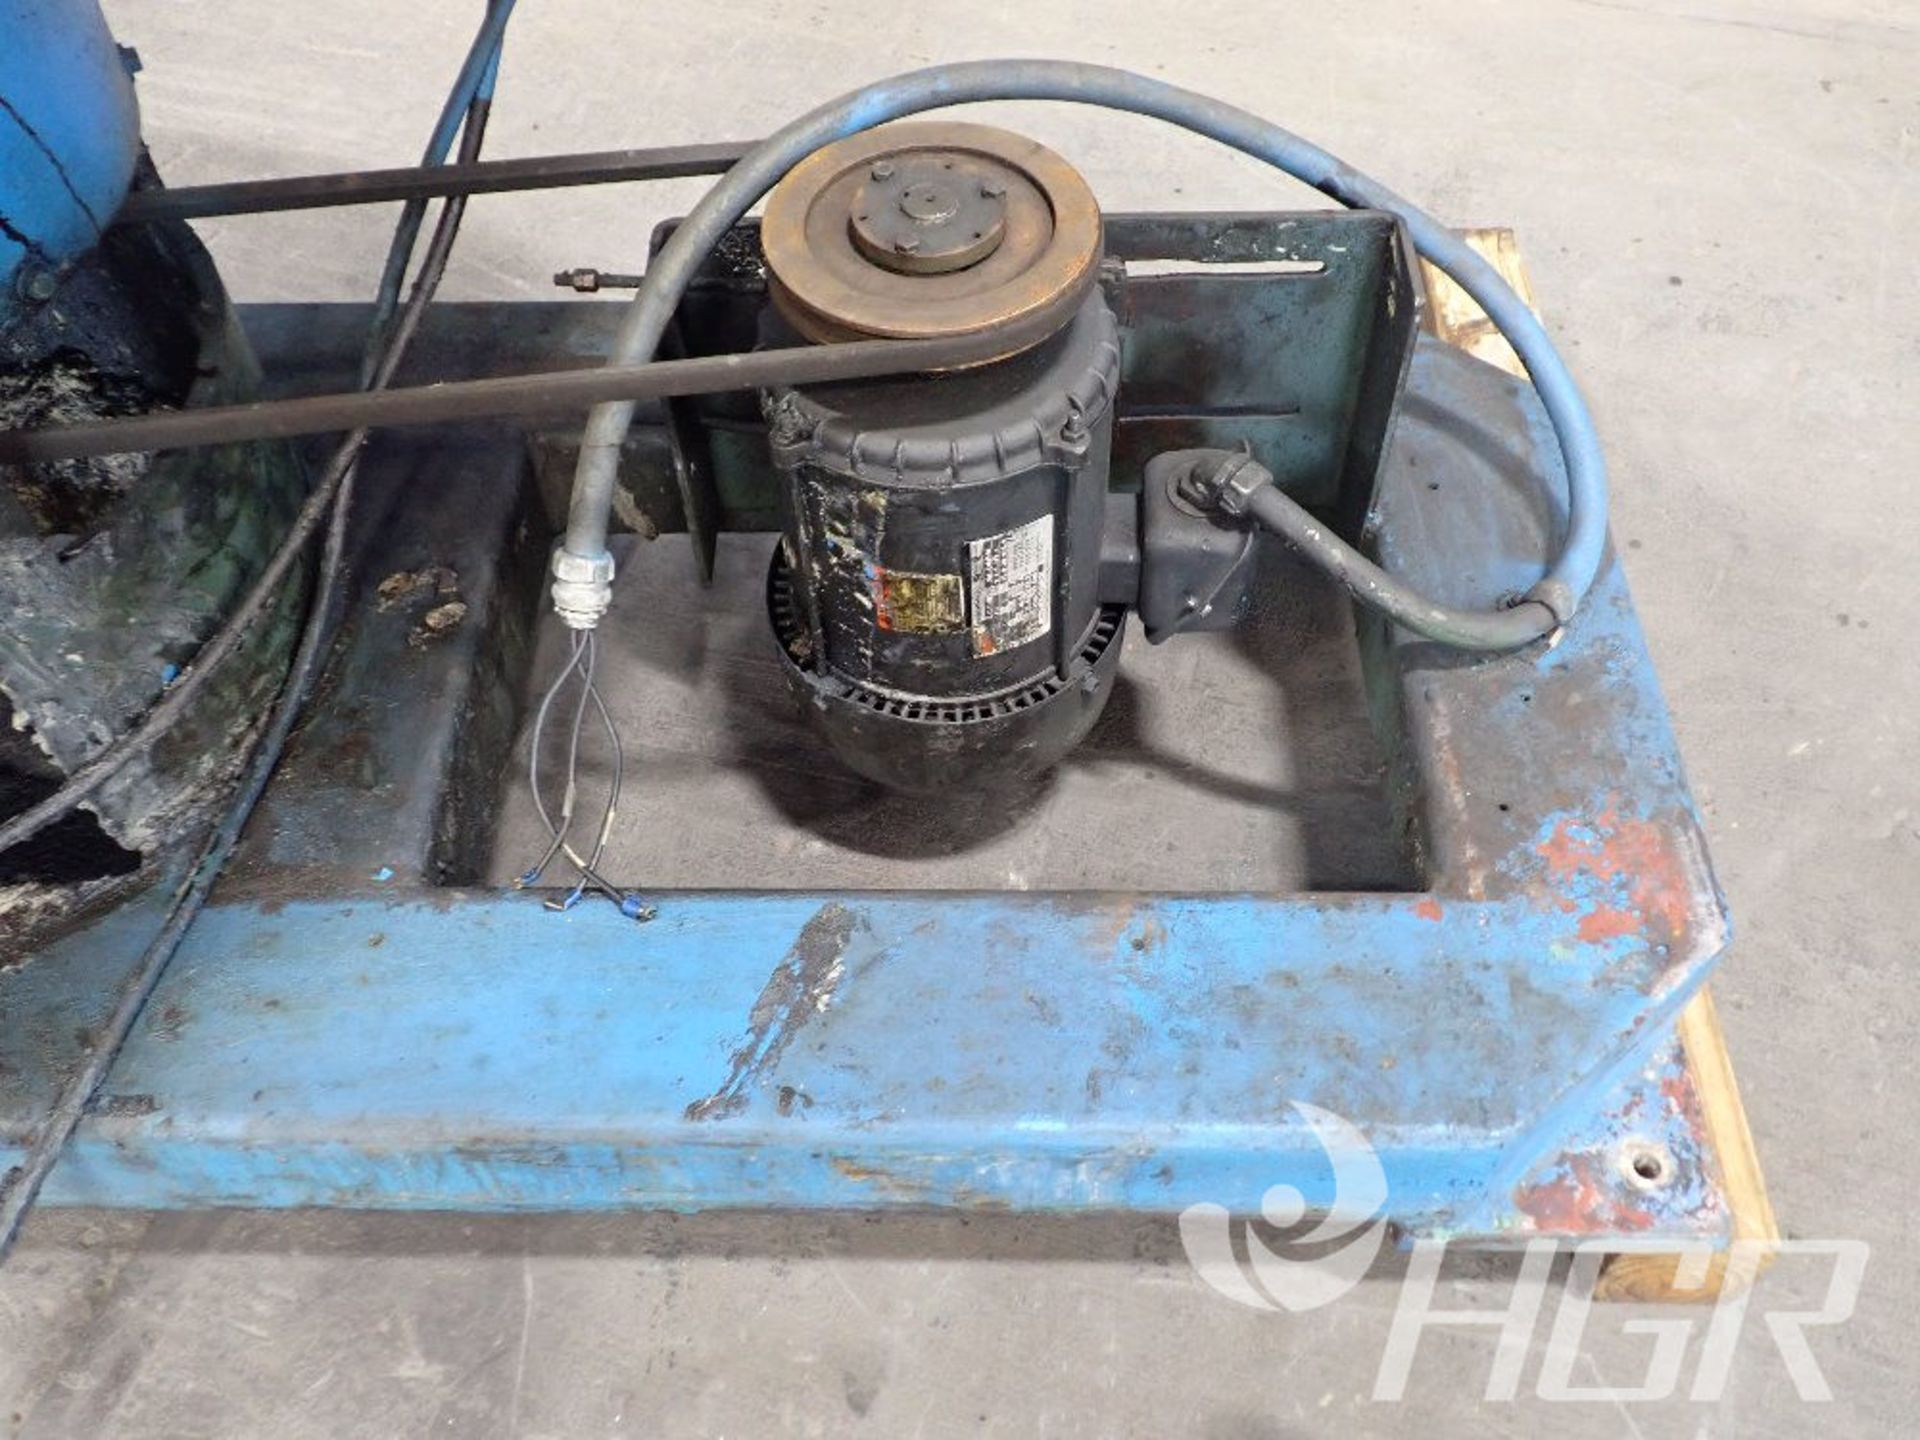 ALMCO VIBRATORY FINISHER, Model OR-5C, Date: n/a; s/n 37803, Approx. Capacity: 36", Power: n/a, - Image 7 of 10